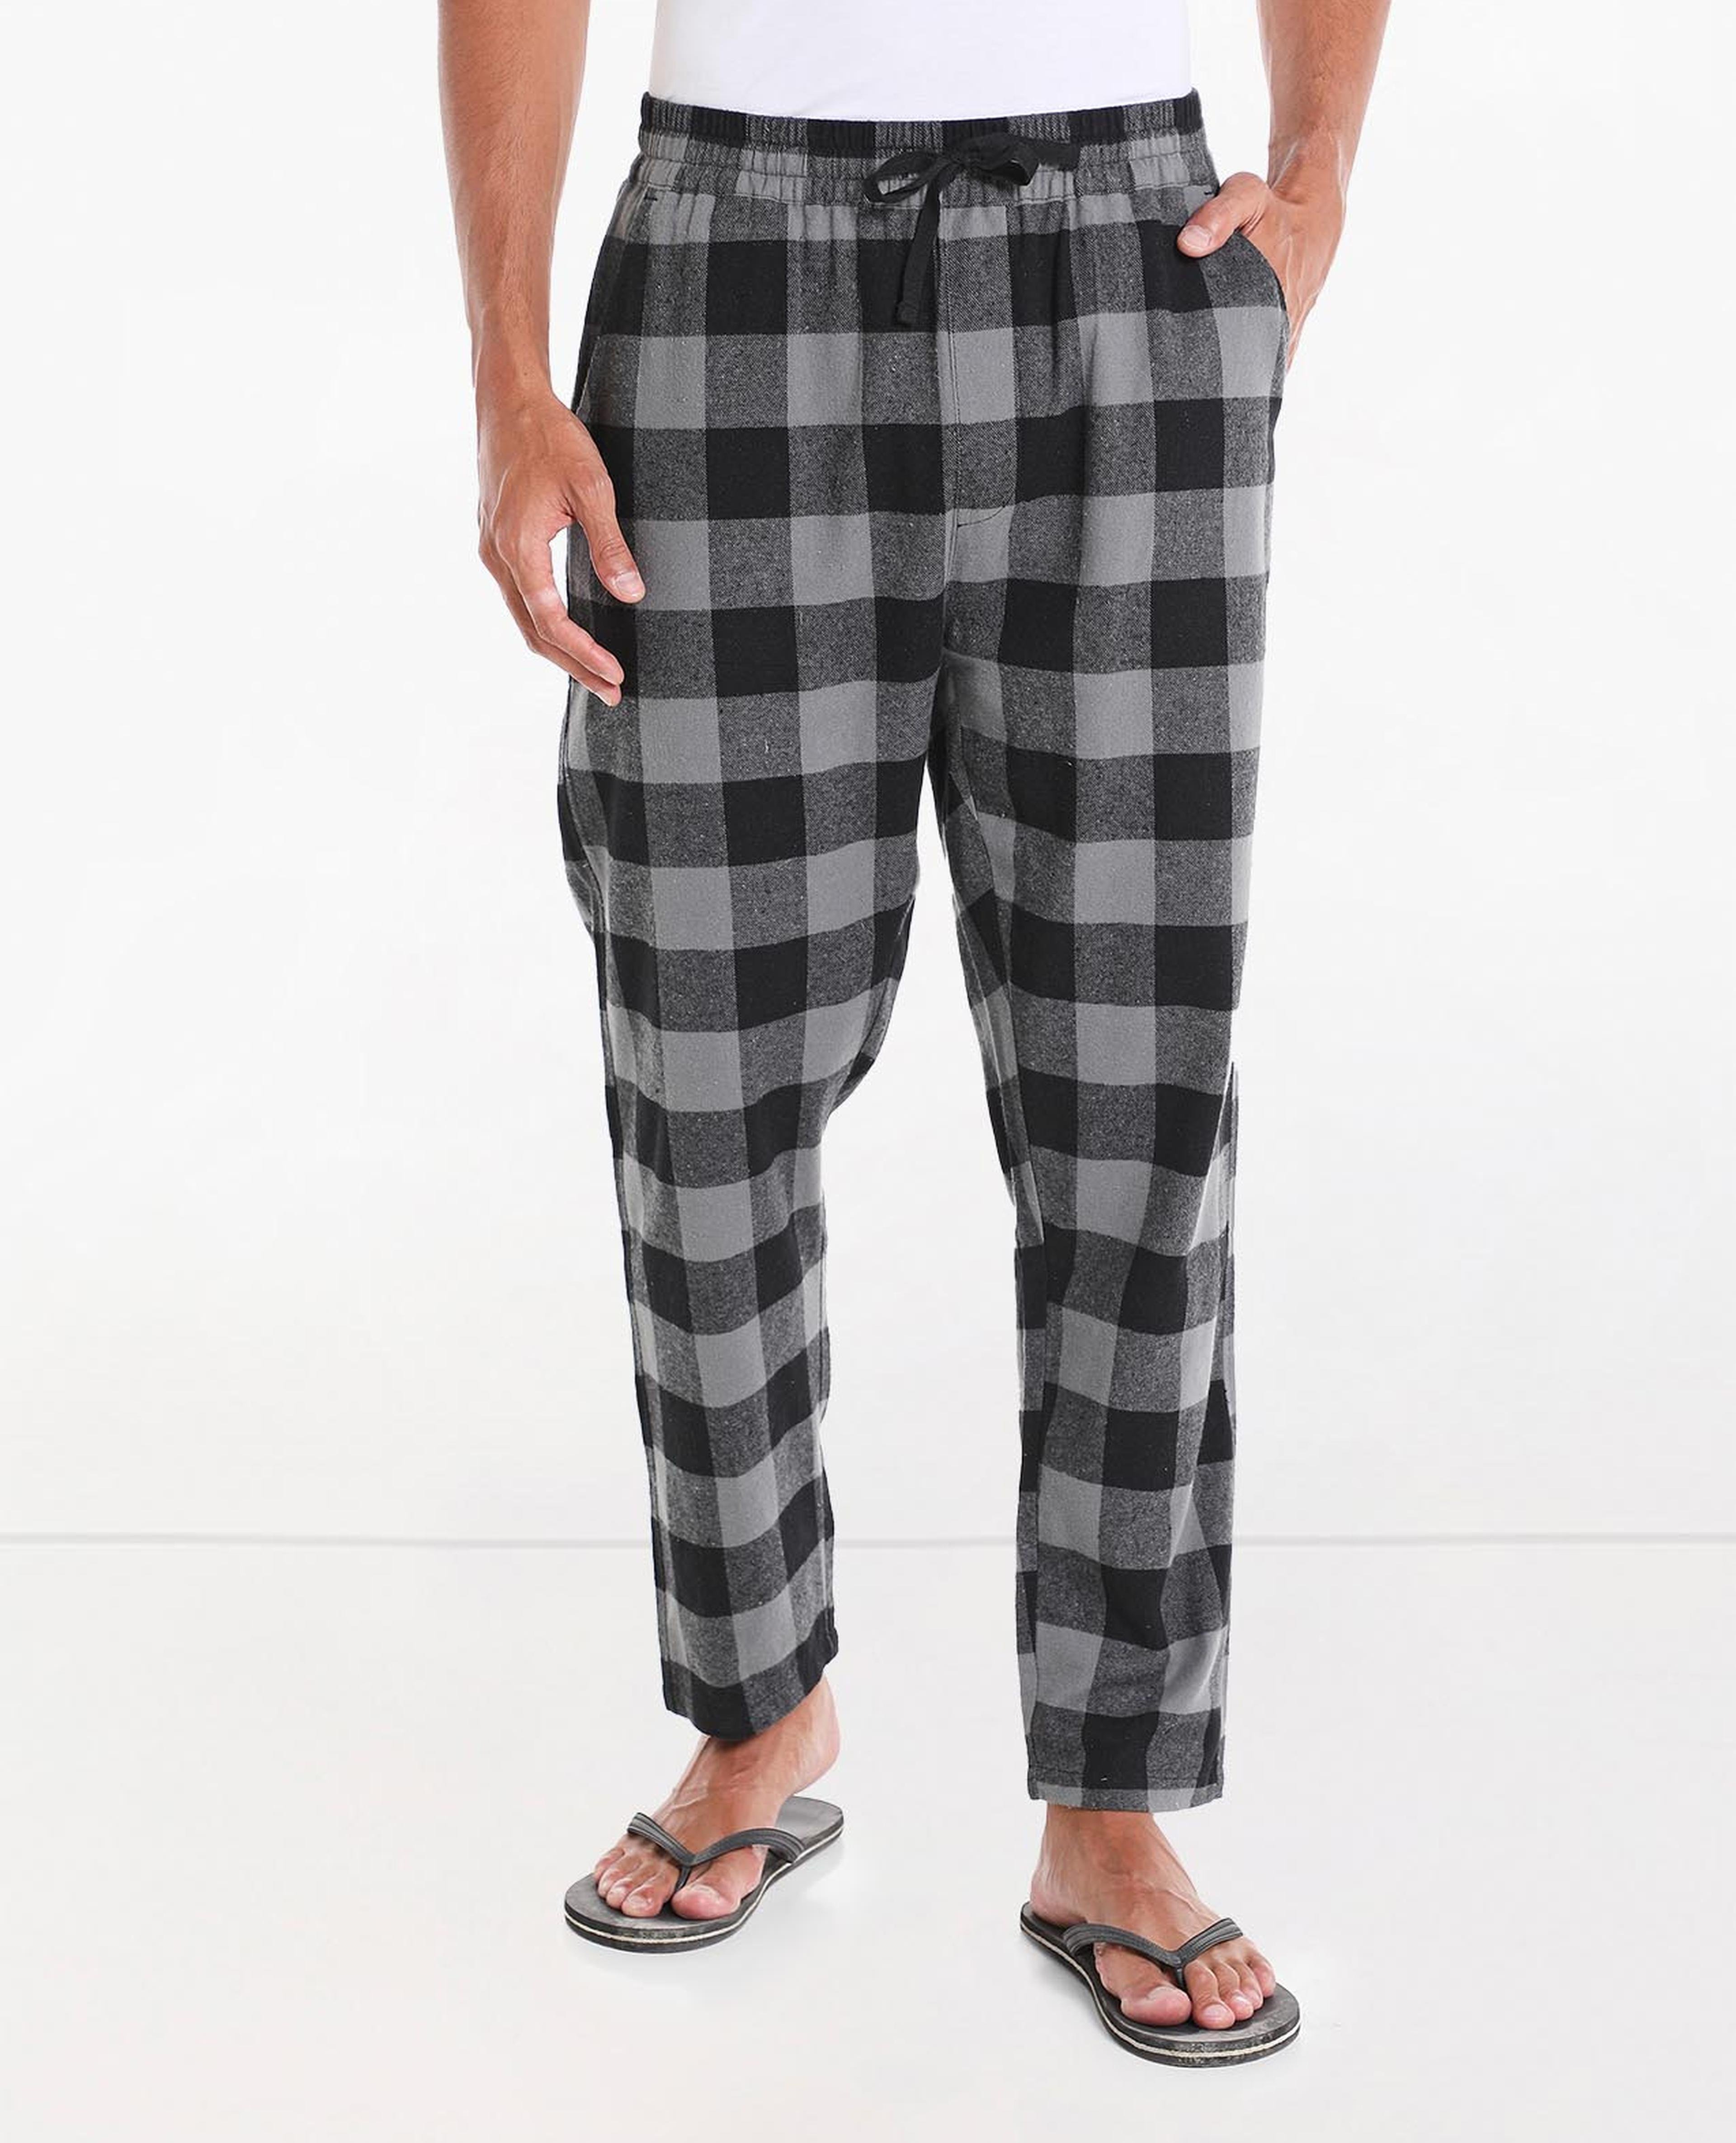 Checkered Lounge Pants with Elasticated Drawstring Waist